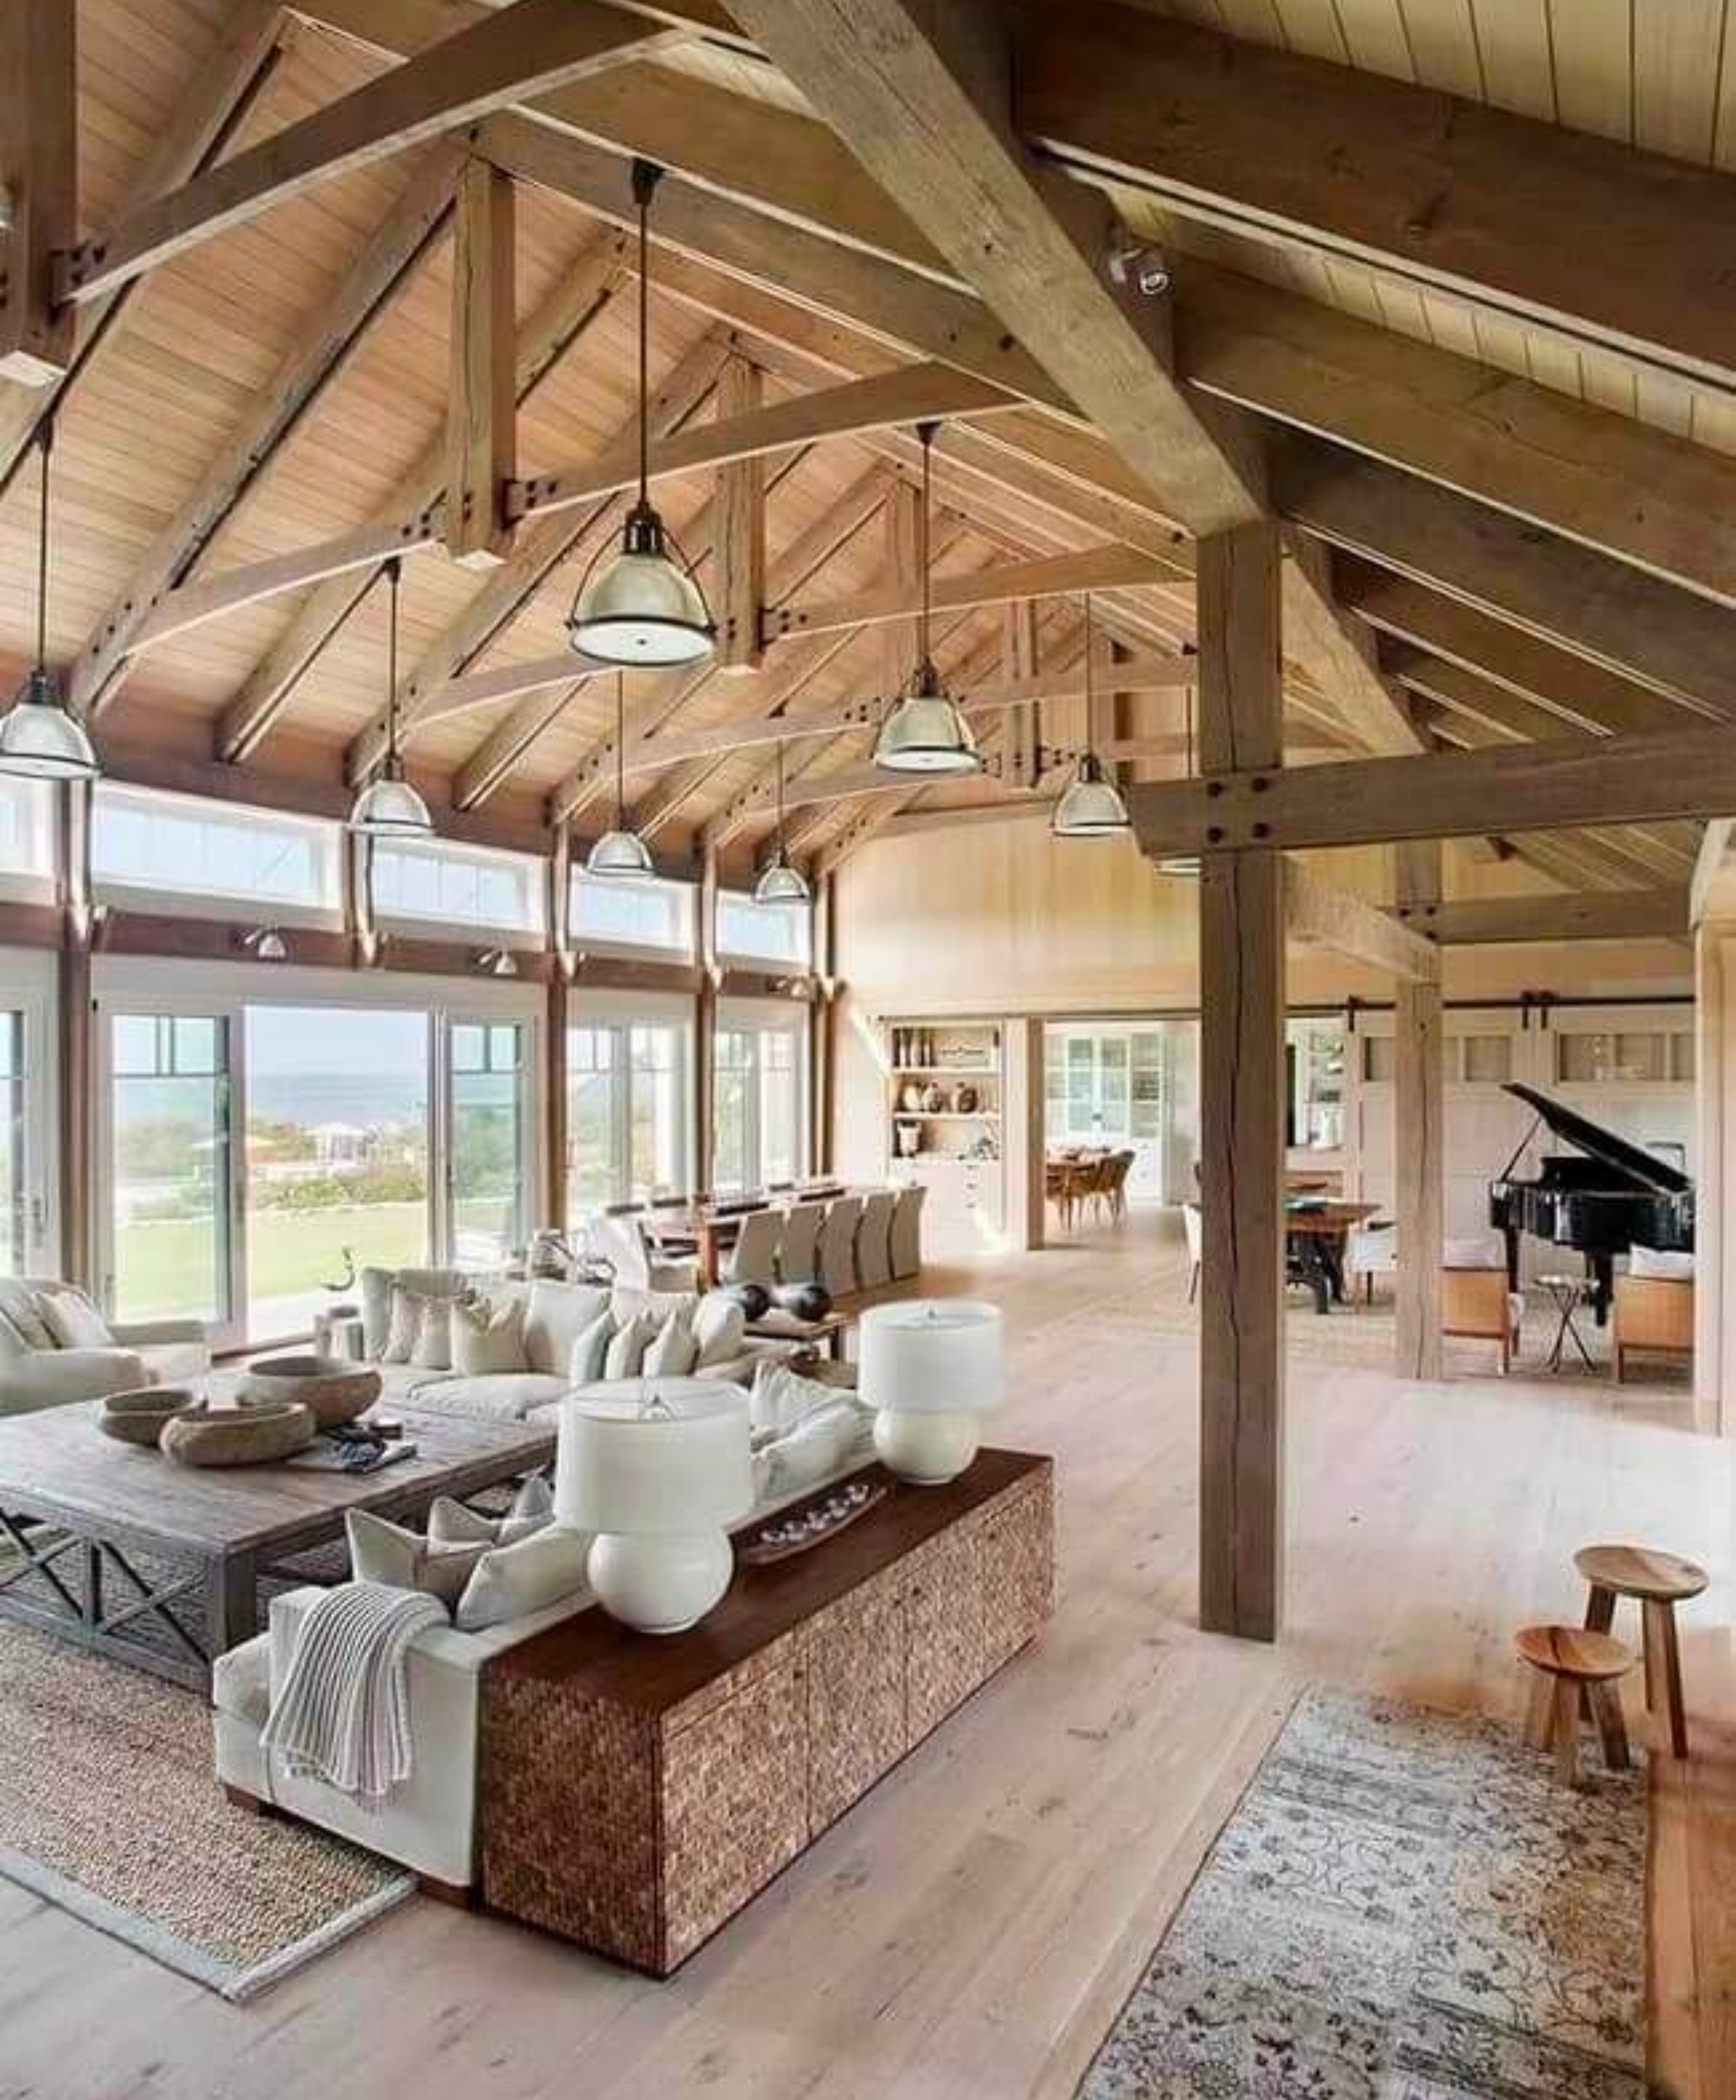 Large Barndominium Interior with living area, dining room, grand piano, and kitchen area